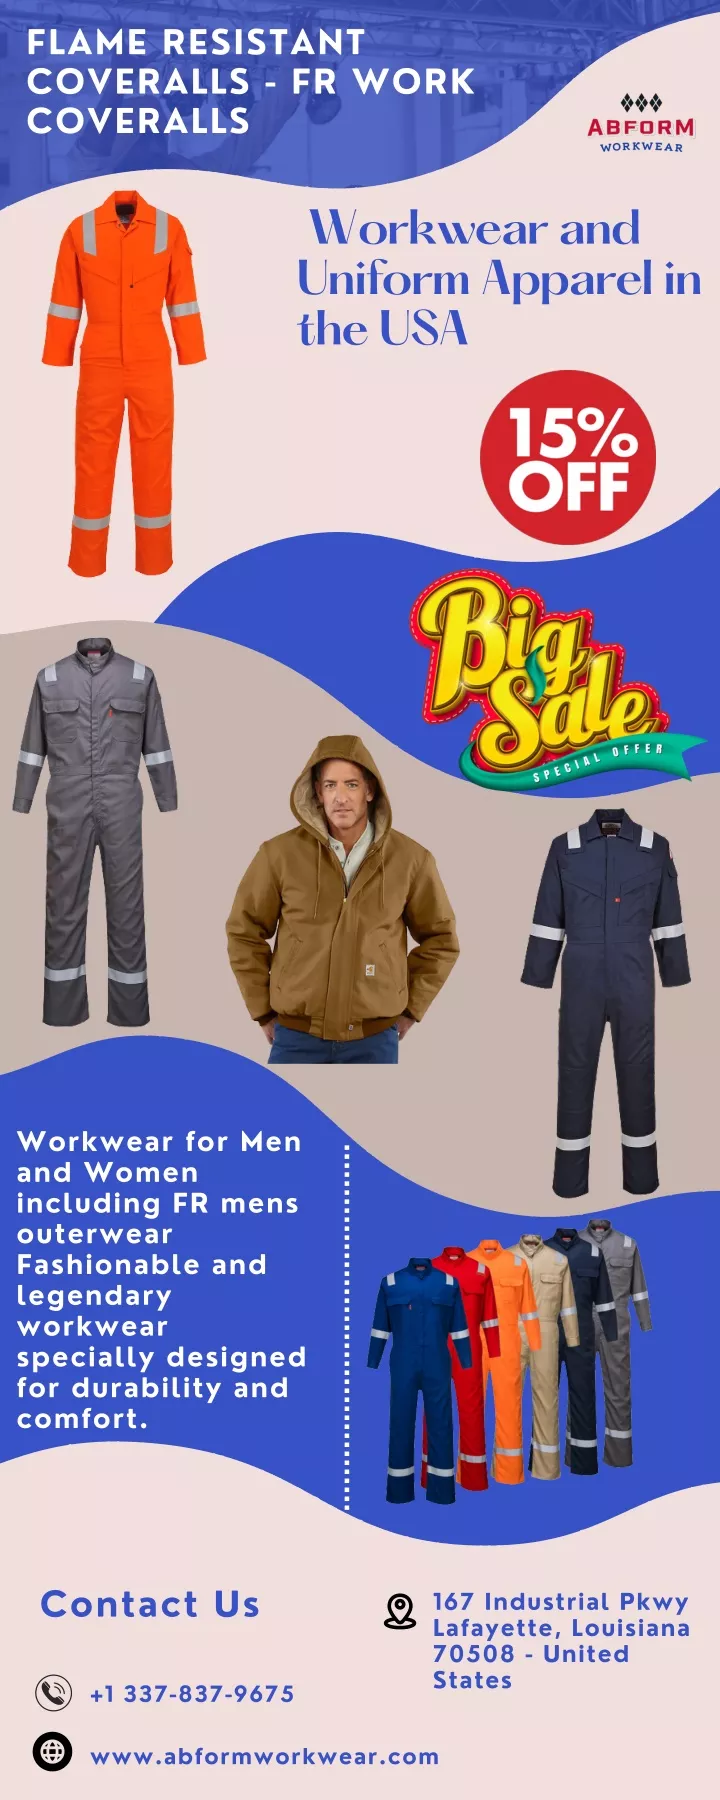 flame resistant coveralls fr work coveralls